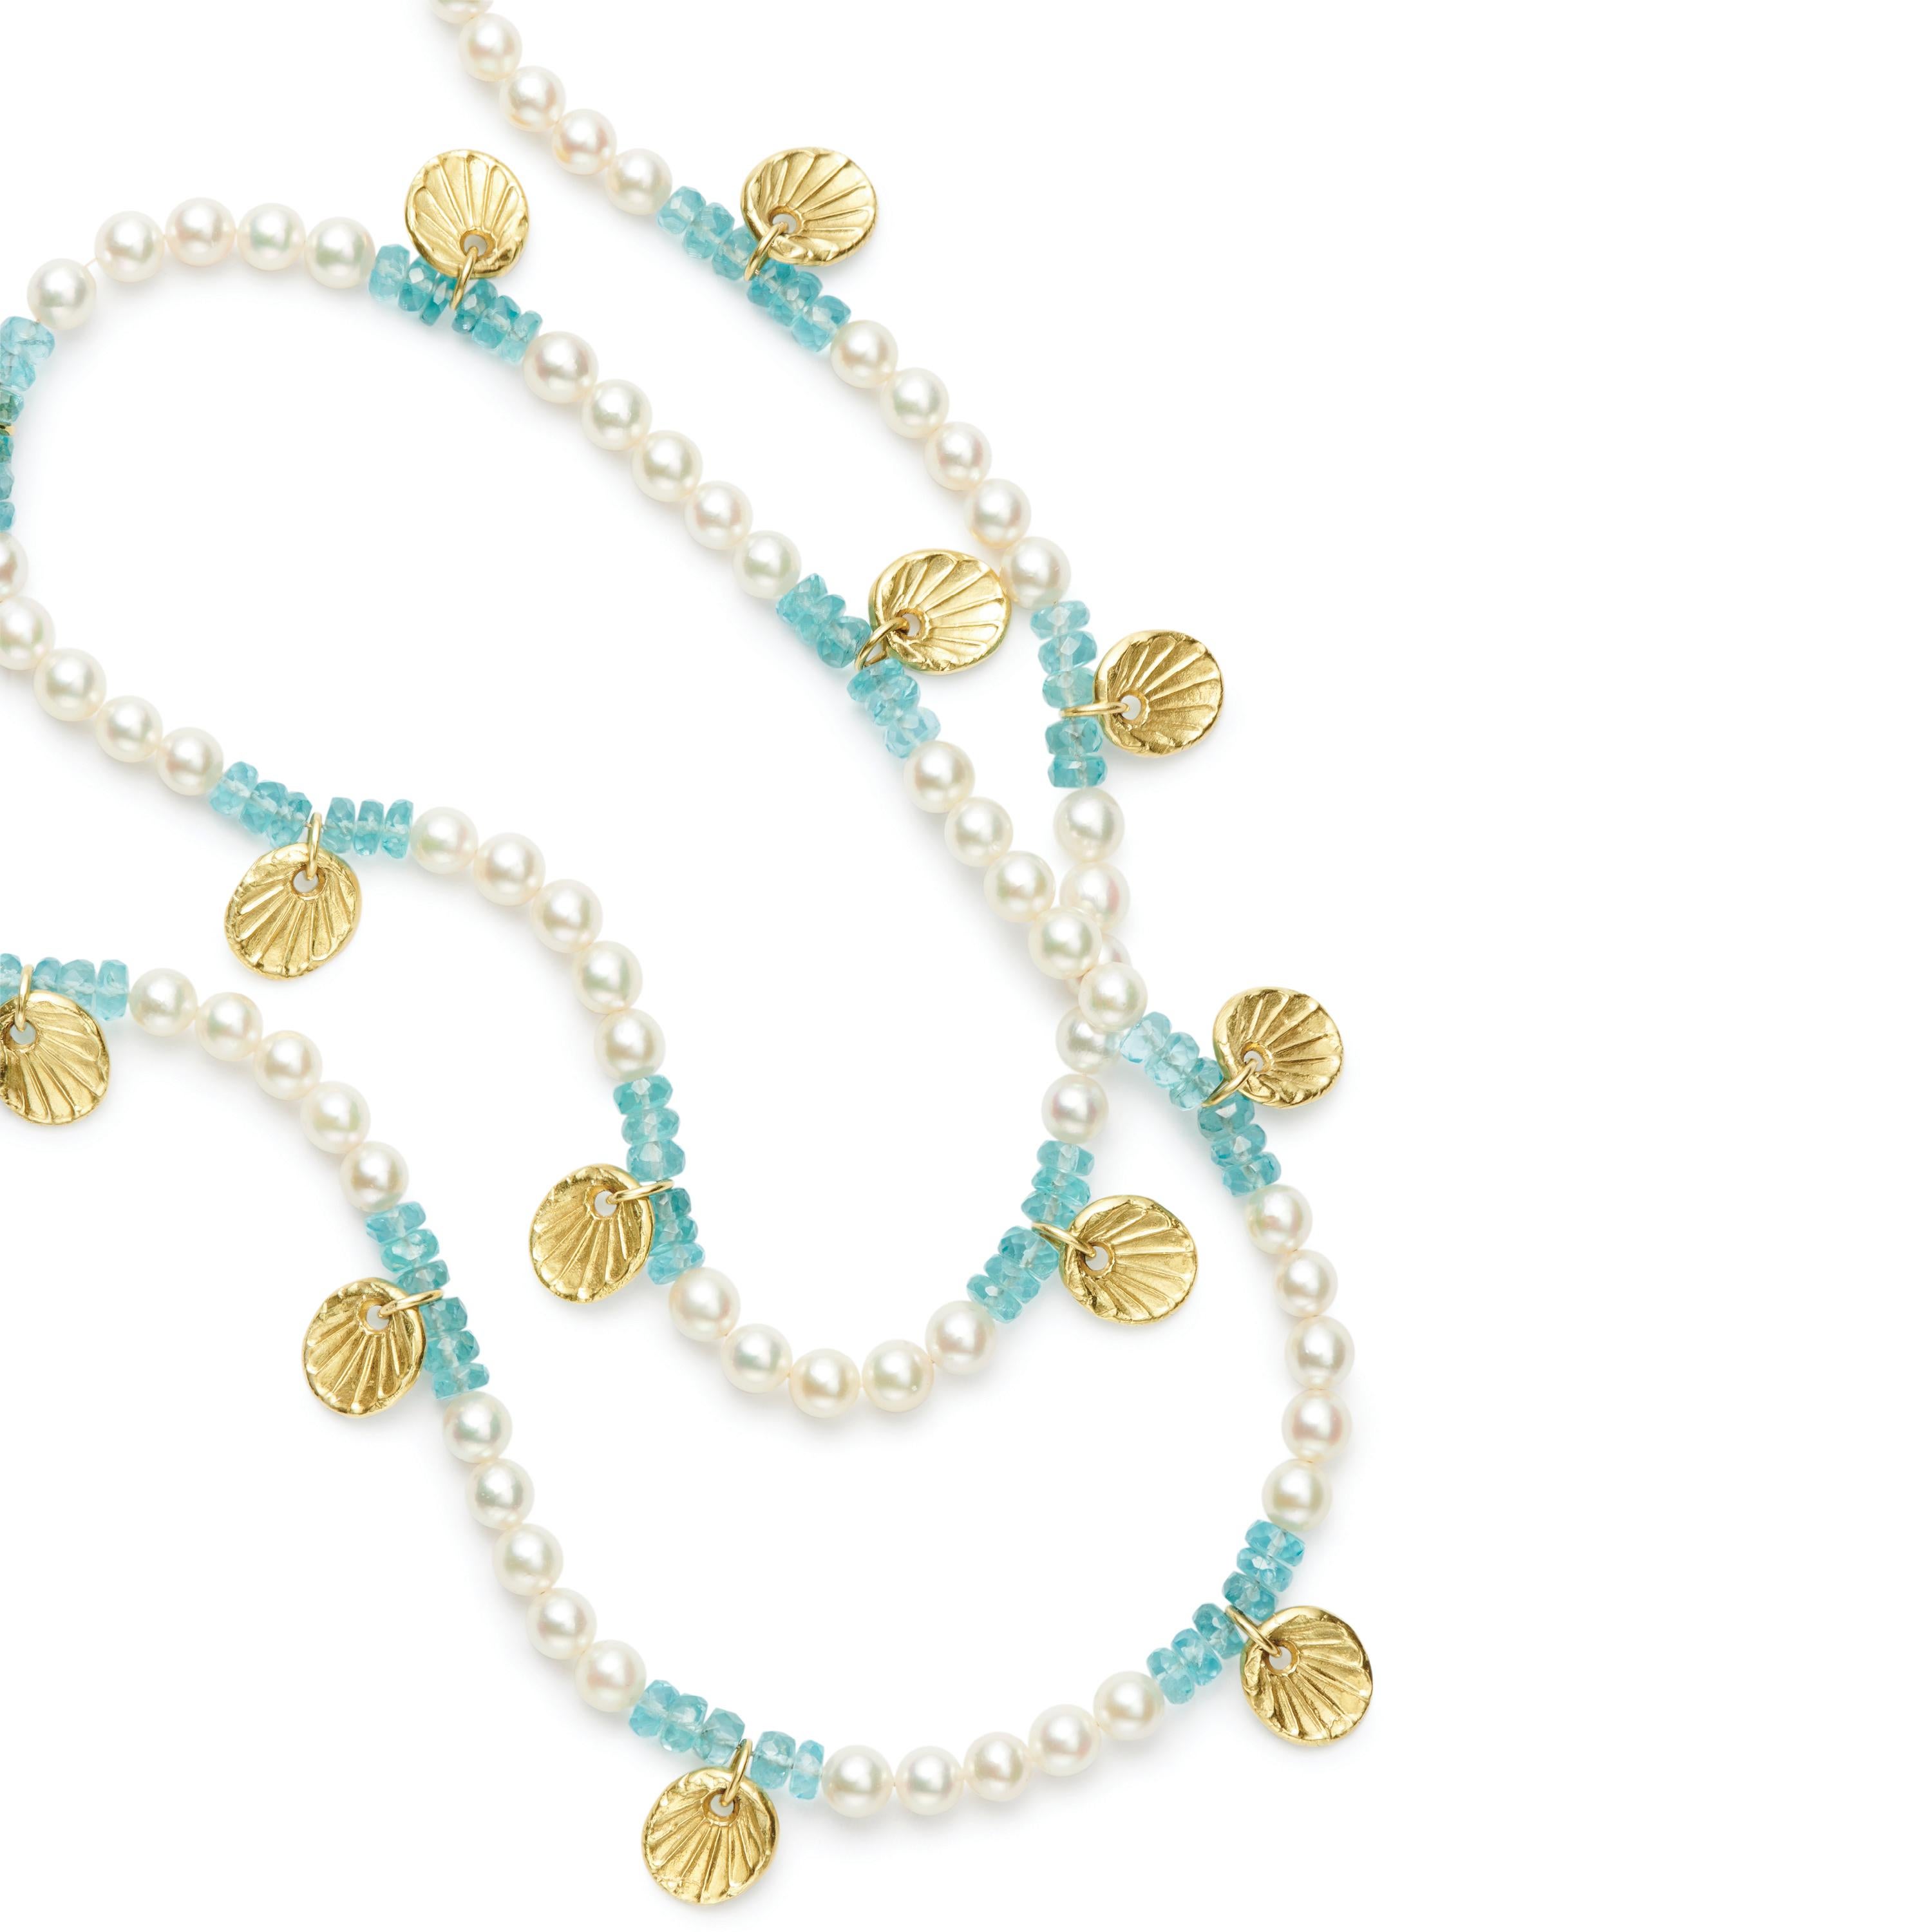 freshwater pearl and apatite bead necklace with gold scallop shells and magnetic clasp